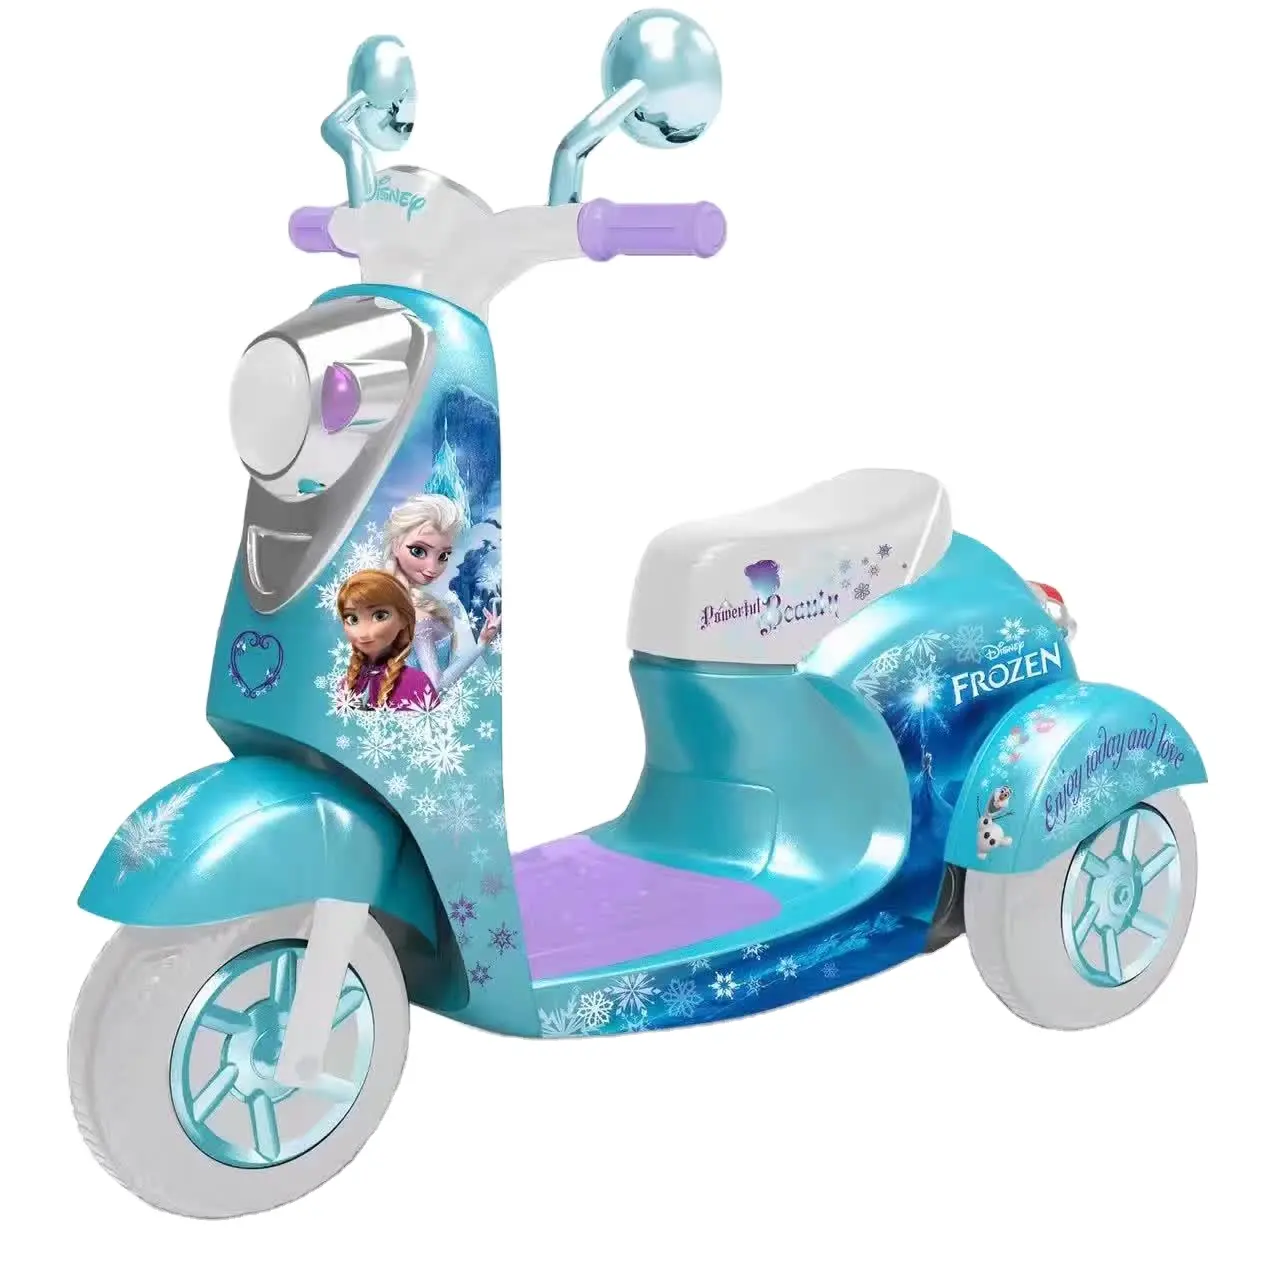 Latest Children Electric Motorcycle for Kids Ride on Motorcycle Electric Toy Car Kids Electric Toy Car Wholesale Toy Electric Ca